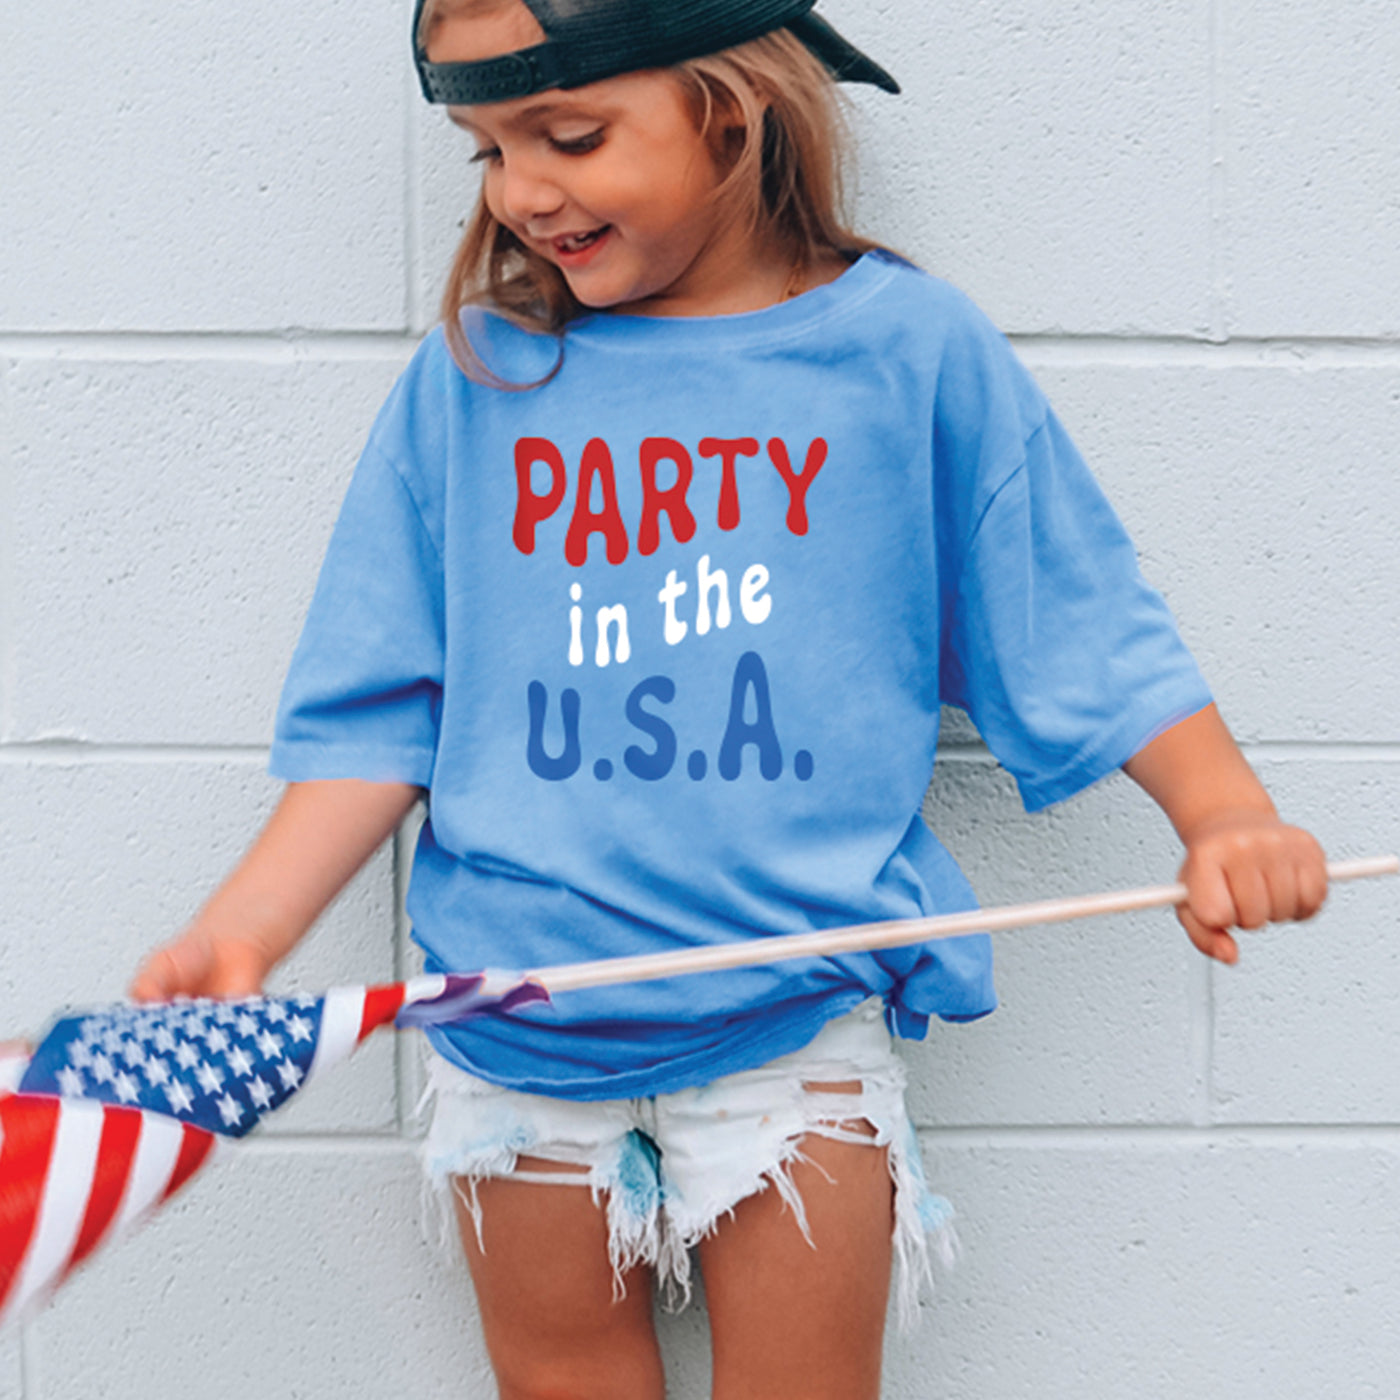 little girl wearing light blue shirt with red white and blue party in the USA retro wavy print holding american flag